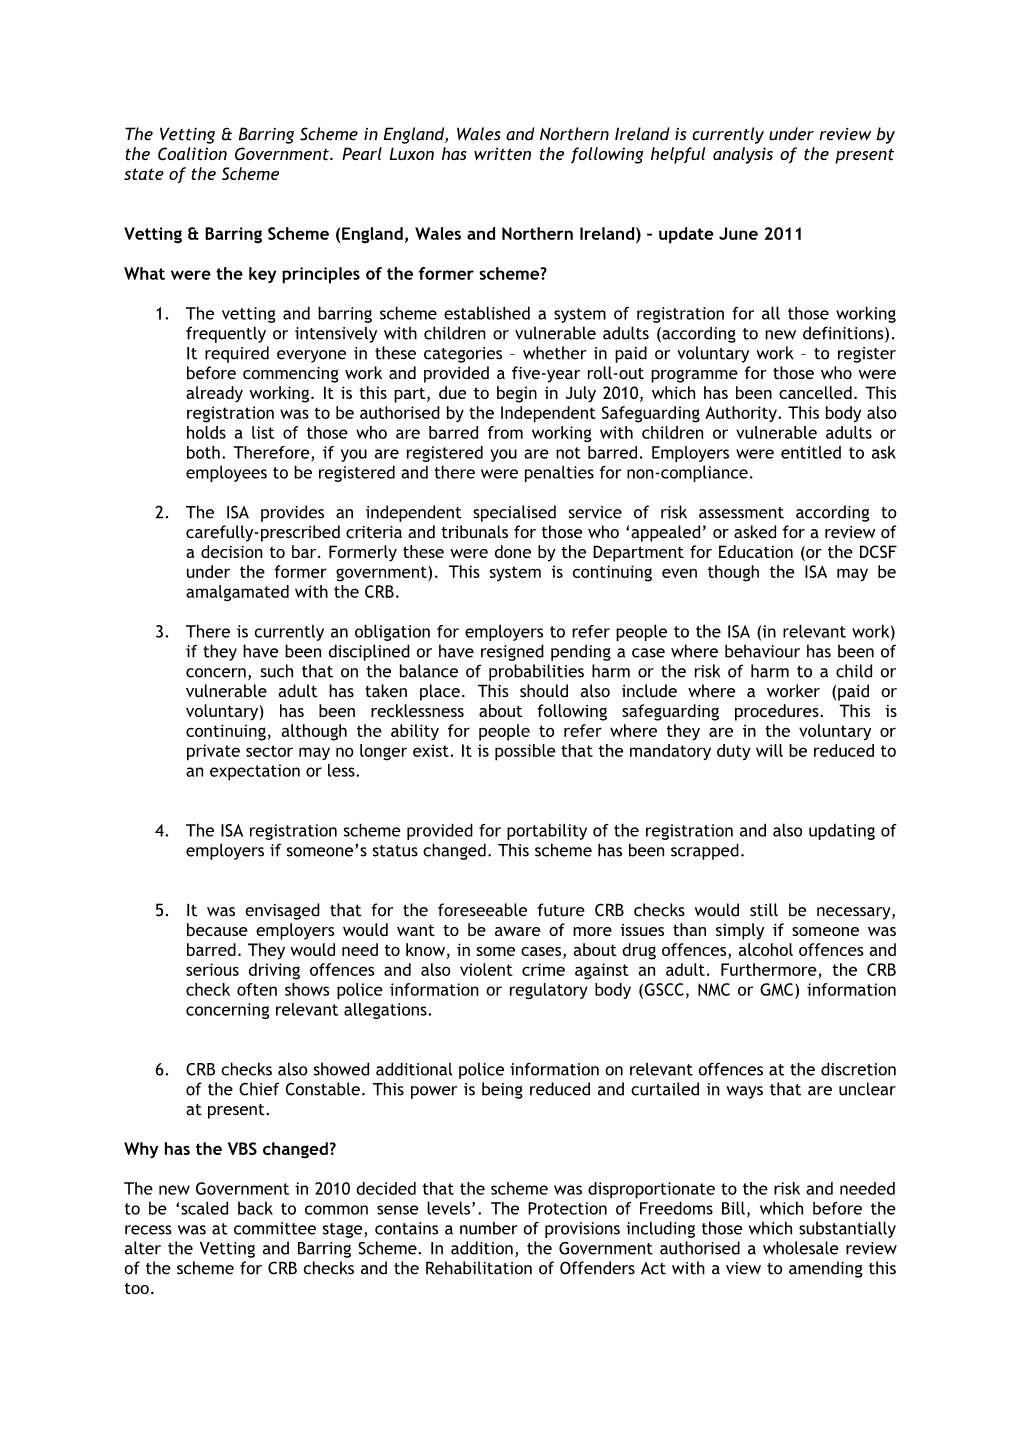 Vetting and Barring Scheme (England, Wales and Northern Ireland) Update -June 2011